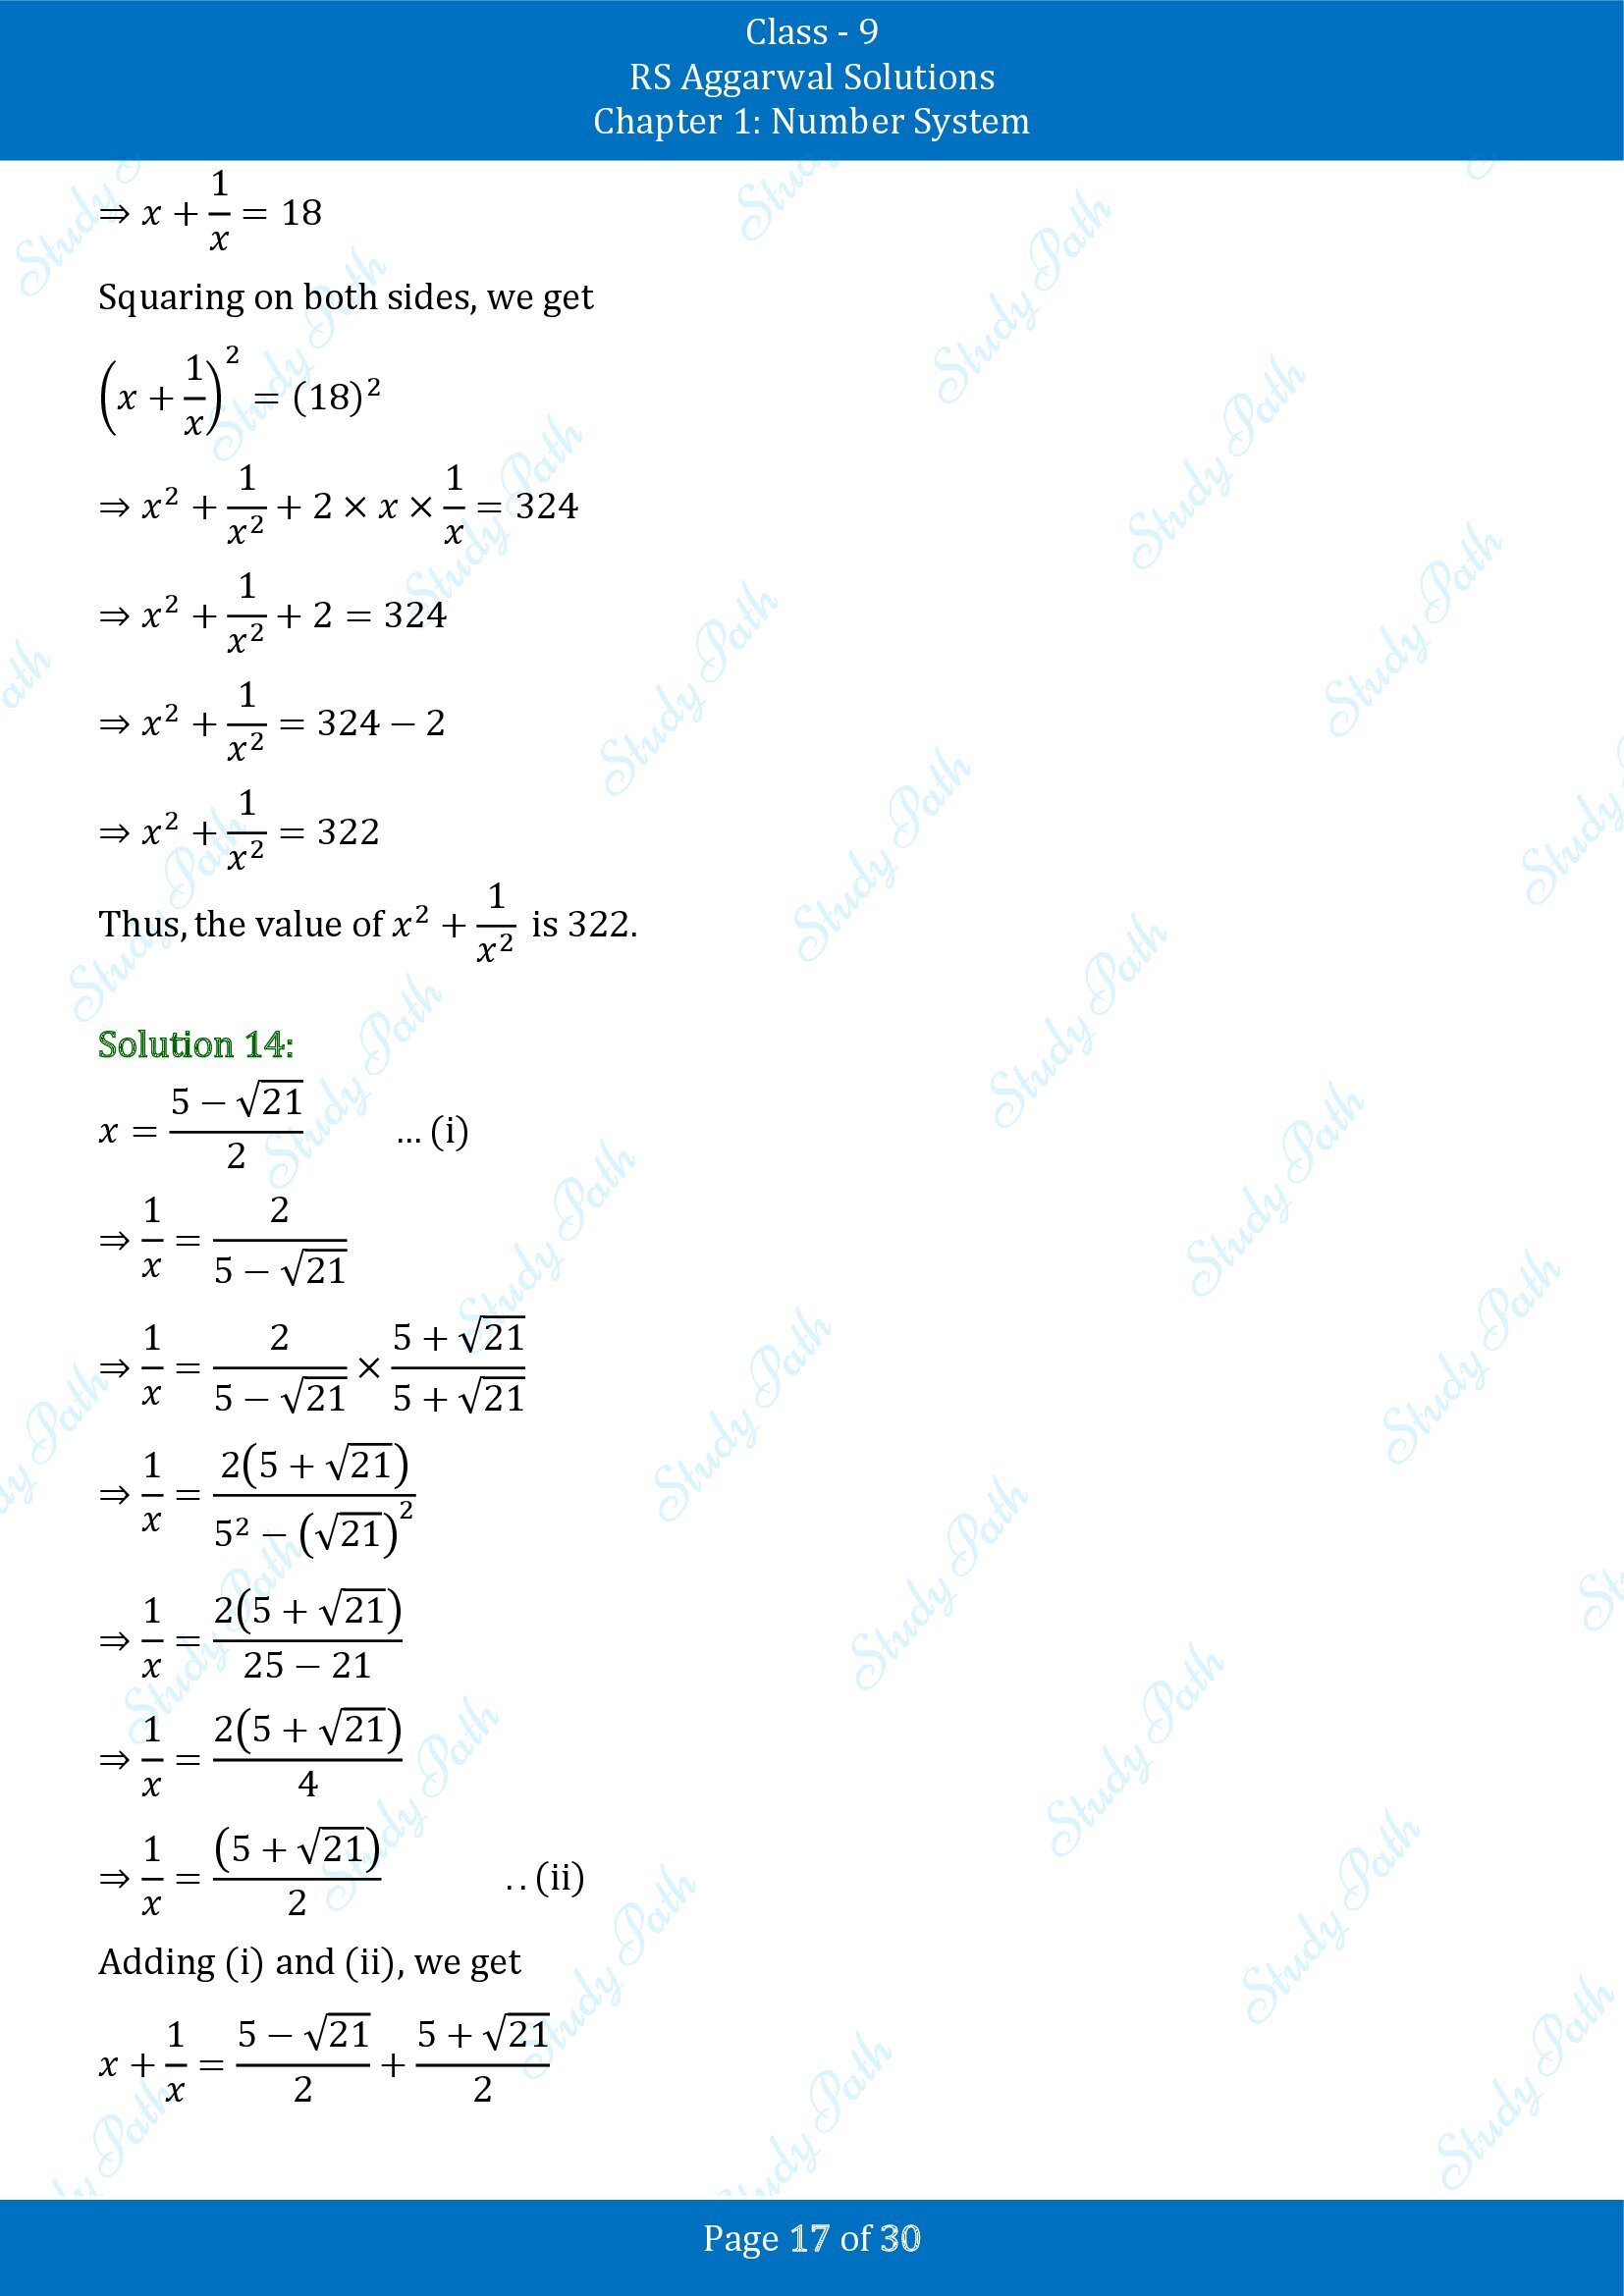 RS Aggarwal Solutions Class 9 Chapter 1 Number System Exercise 1F 00017